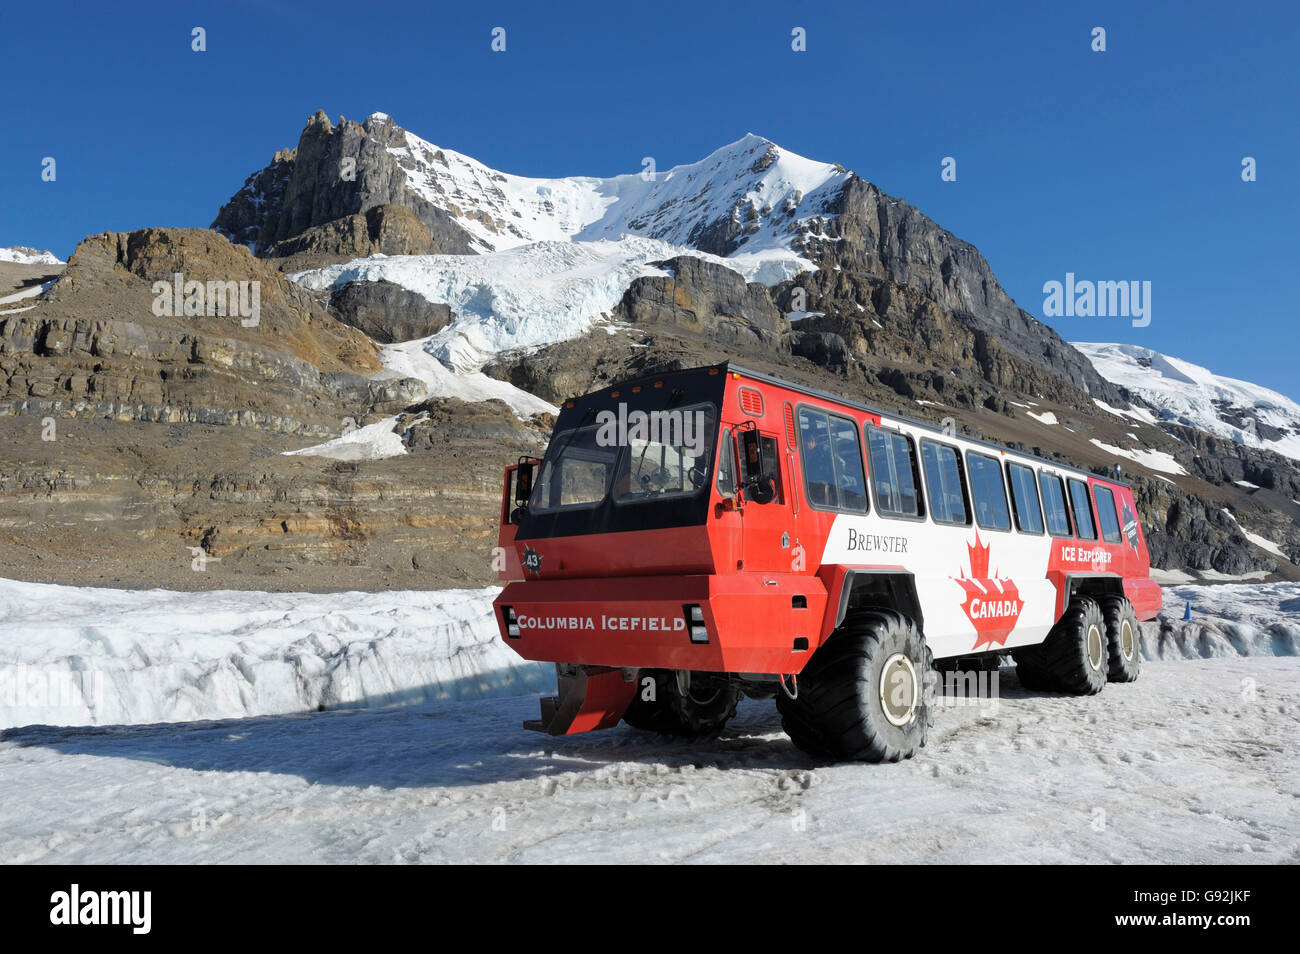 Tour bus of Brewster Transportation Company, Athabasca Glacier, Columbia Icefield, Icefield Parkway, Jasper national park, Alberta, Canada Stock Photo